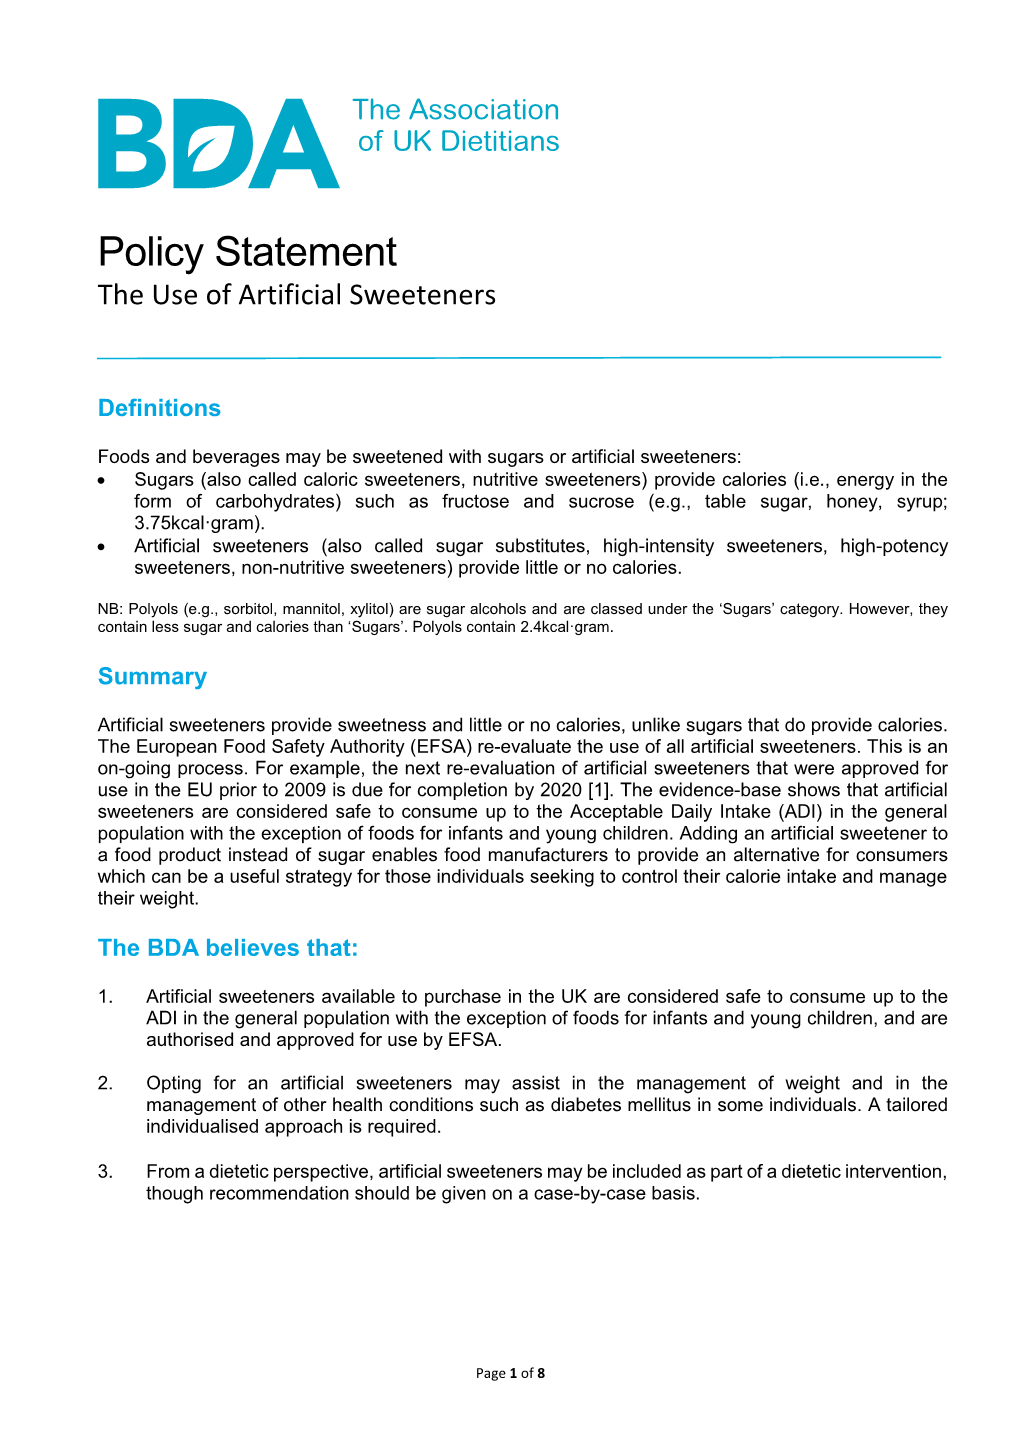 Policy Statement the Use of Artificial Sweeteners